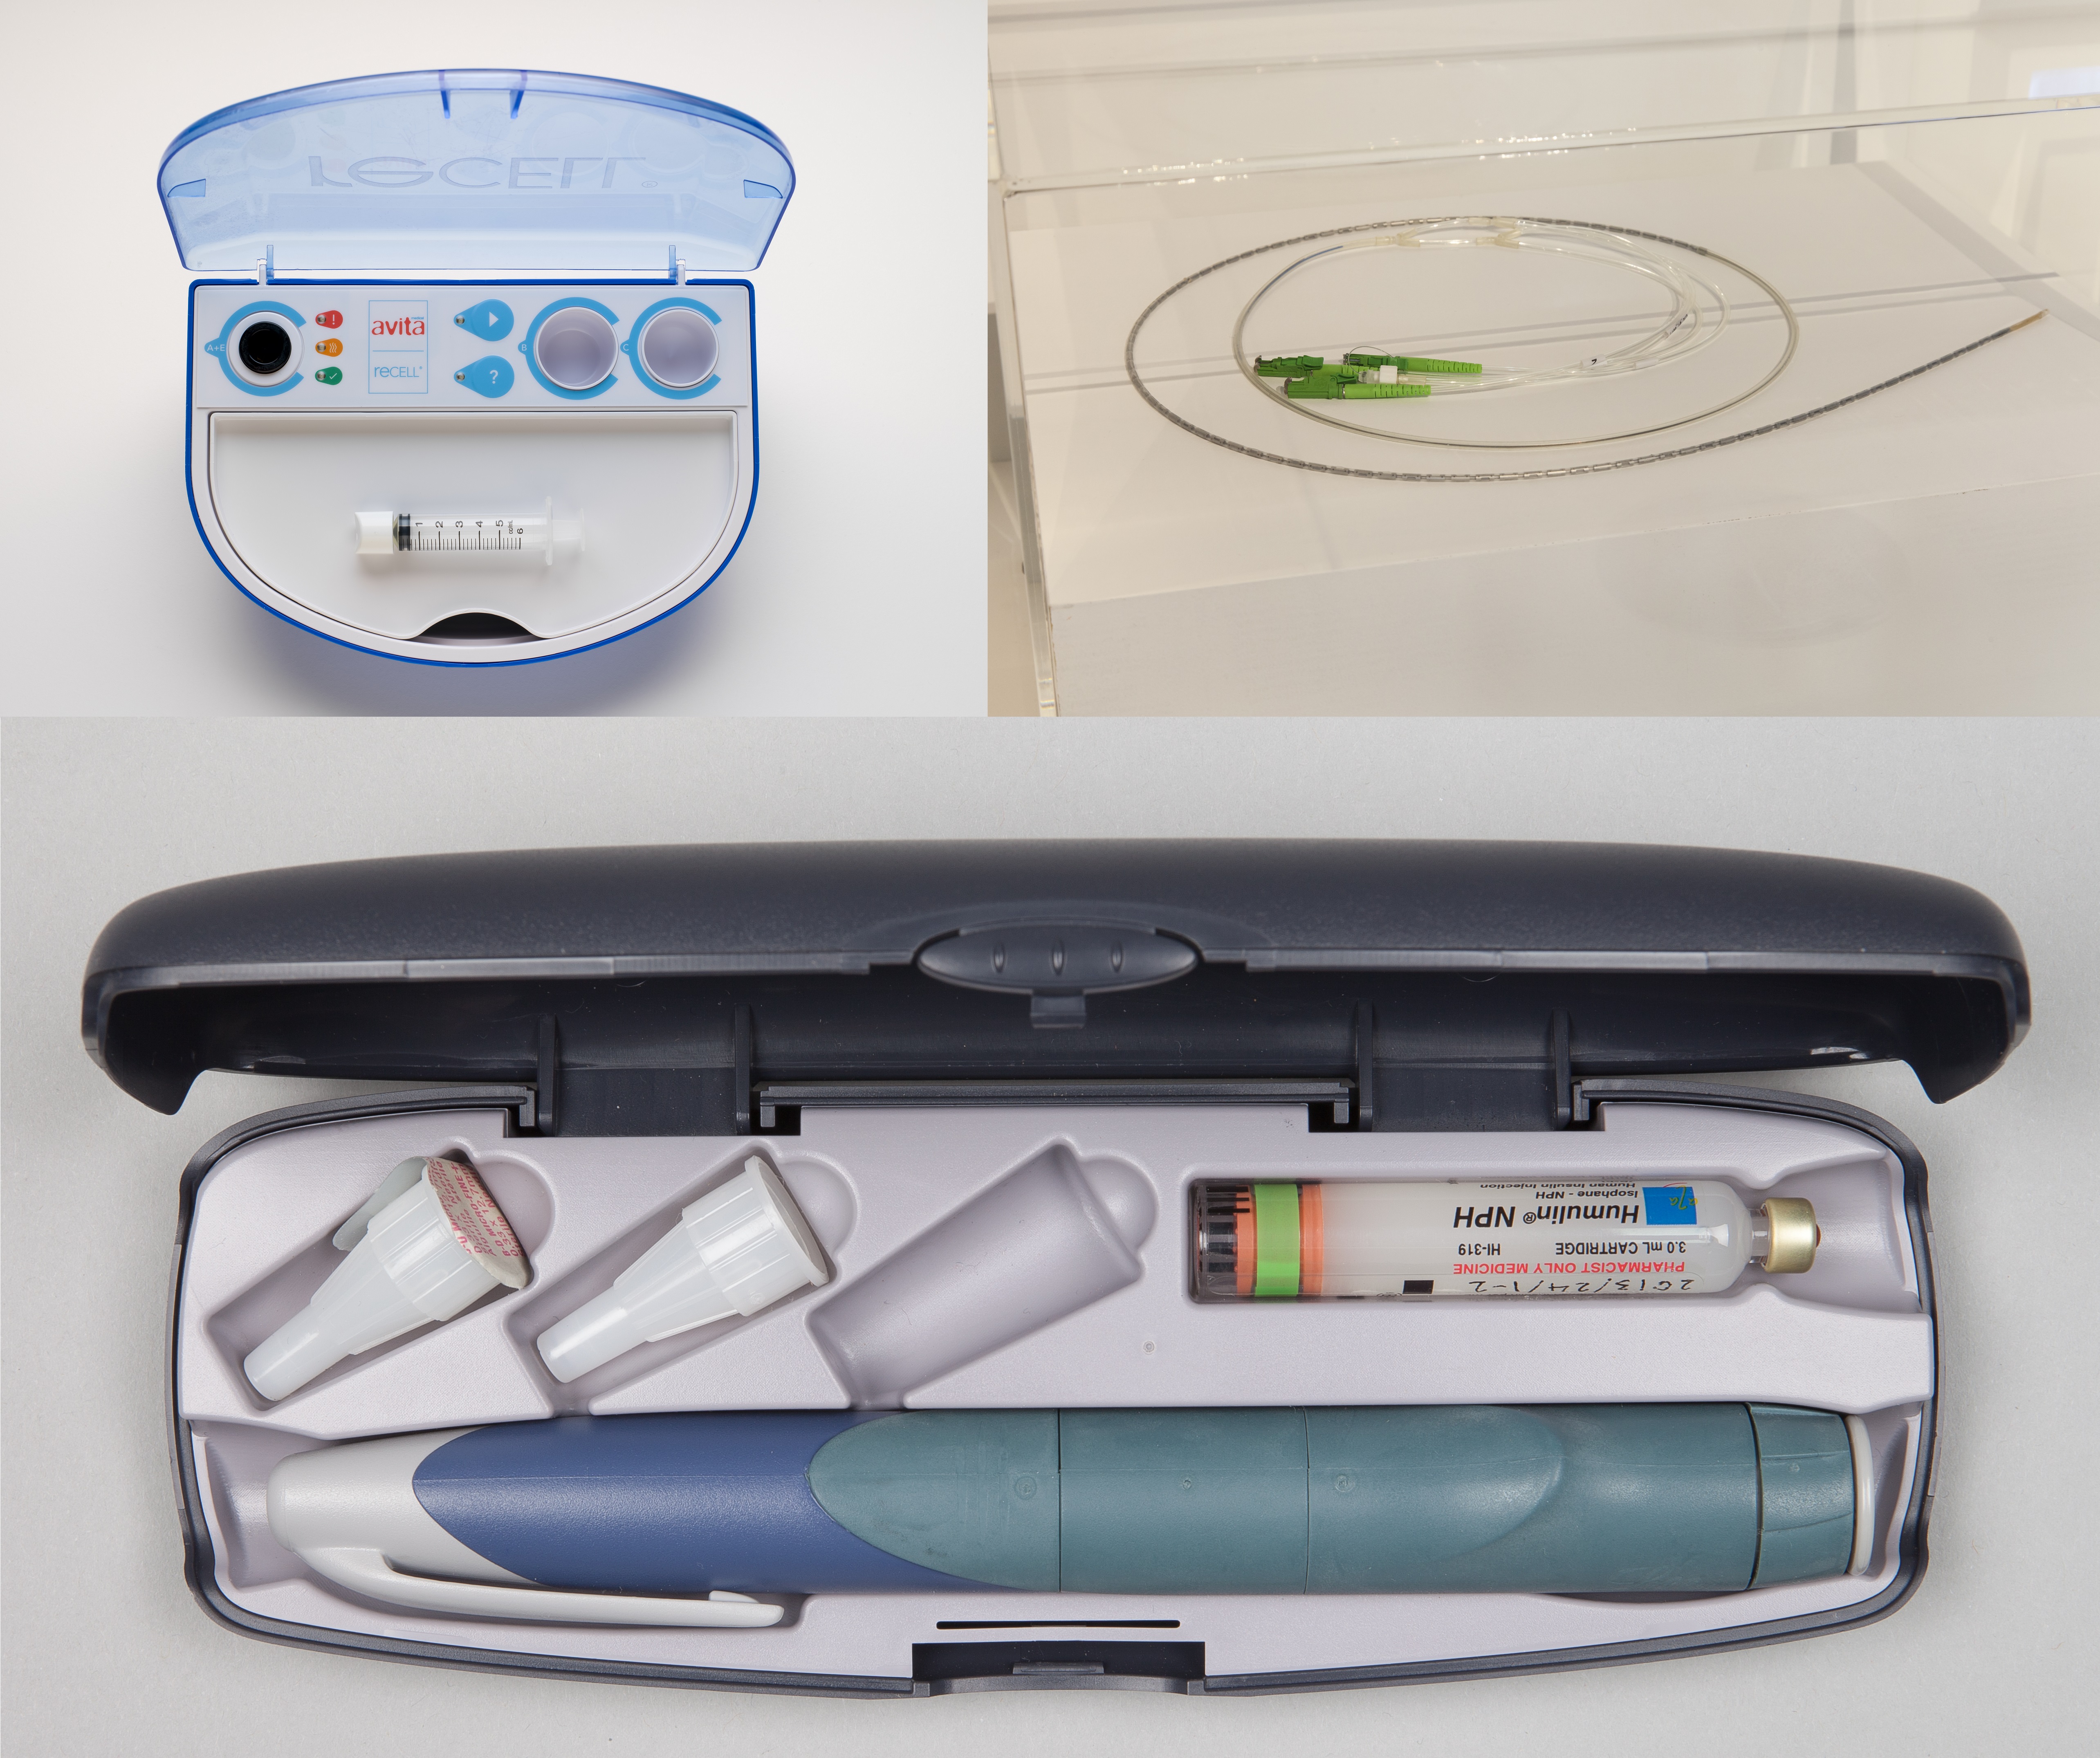 3 separate images in a grid. Top left: top down-view of an plastic medical case with a transparent blue lid. Inside are several indicator lights, receptacles, and a syringe. Top right: A coiled series of thin plastic tubes, within which can be seen wires and 1cm long metal sensors. At one end of the tubes are bright green plastic clips or plugs. Bottom: top down view of an open metal case with a dark blue lid. Inside the case are a series of nozzles and a vial and below that a pen-like insulin injector.